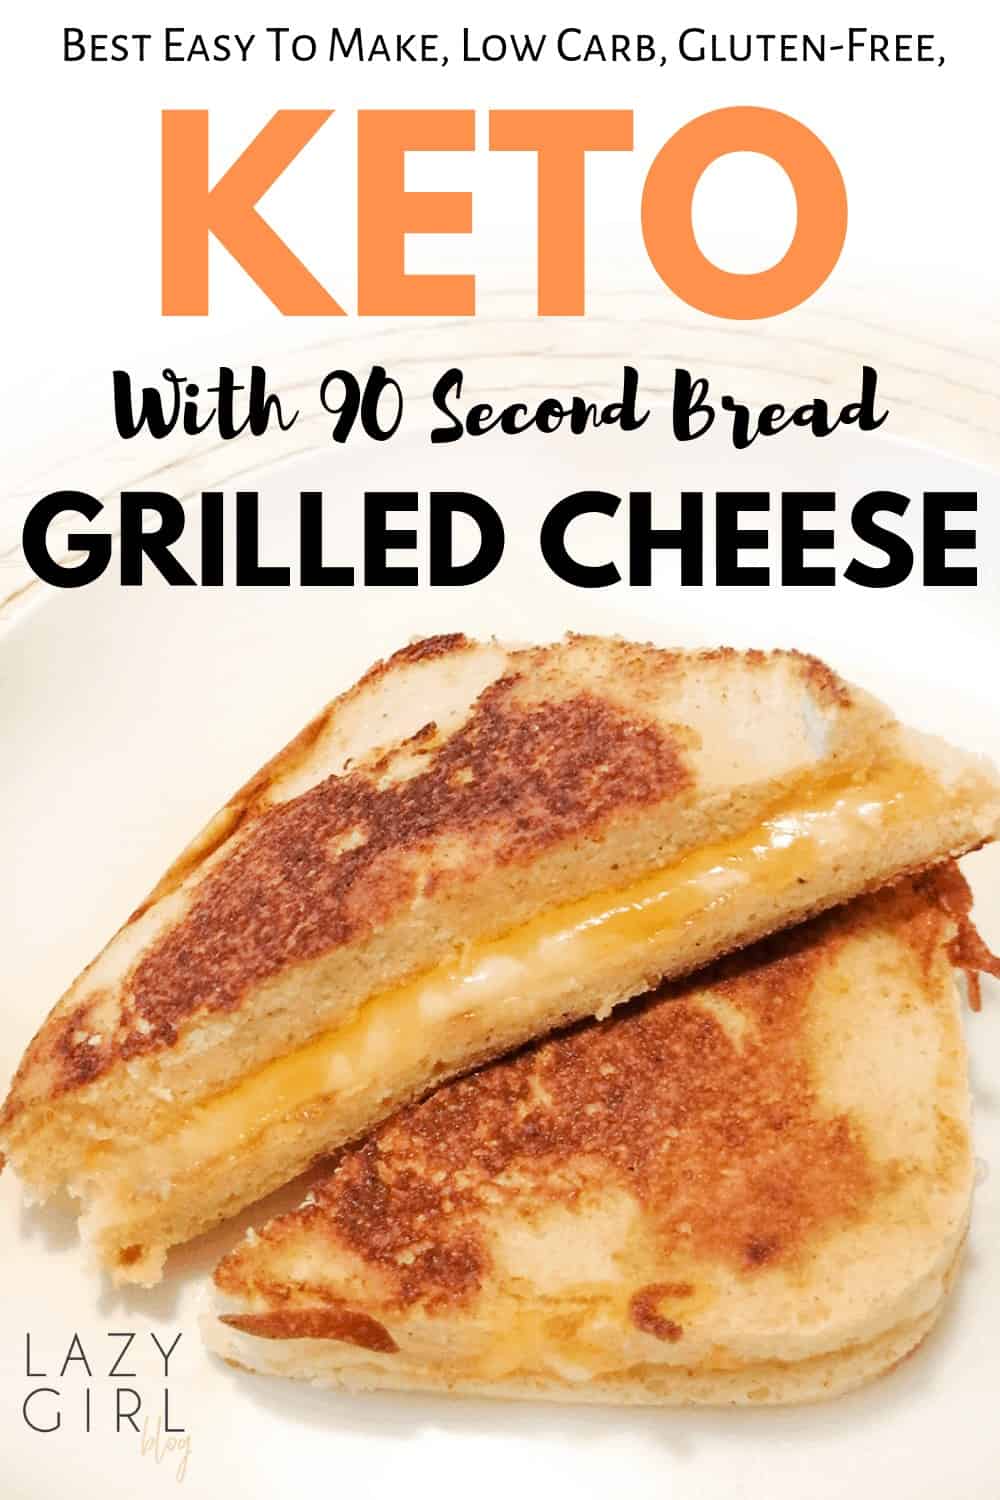 Keto Grilled Cheese With 90 Second Bread